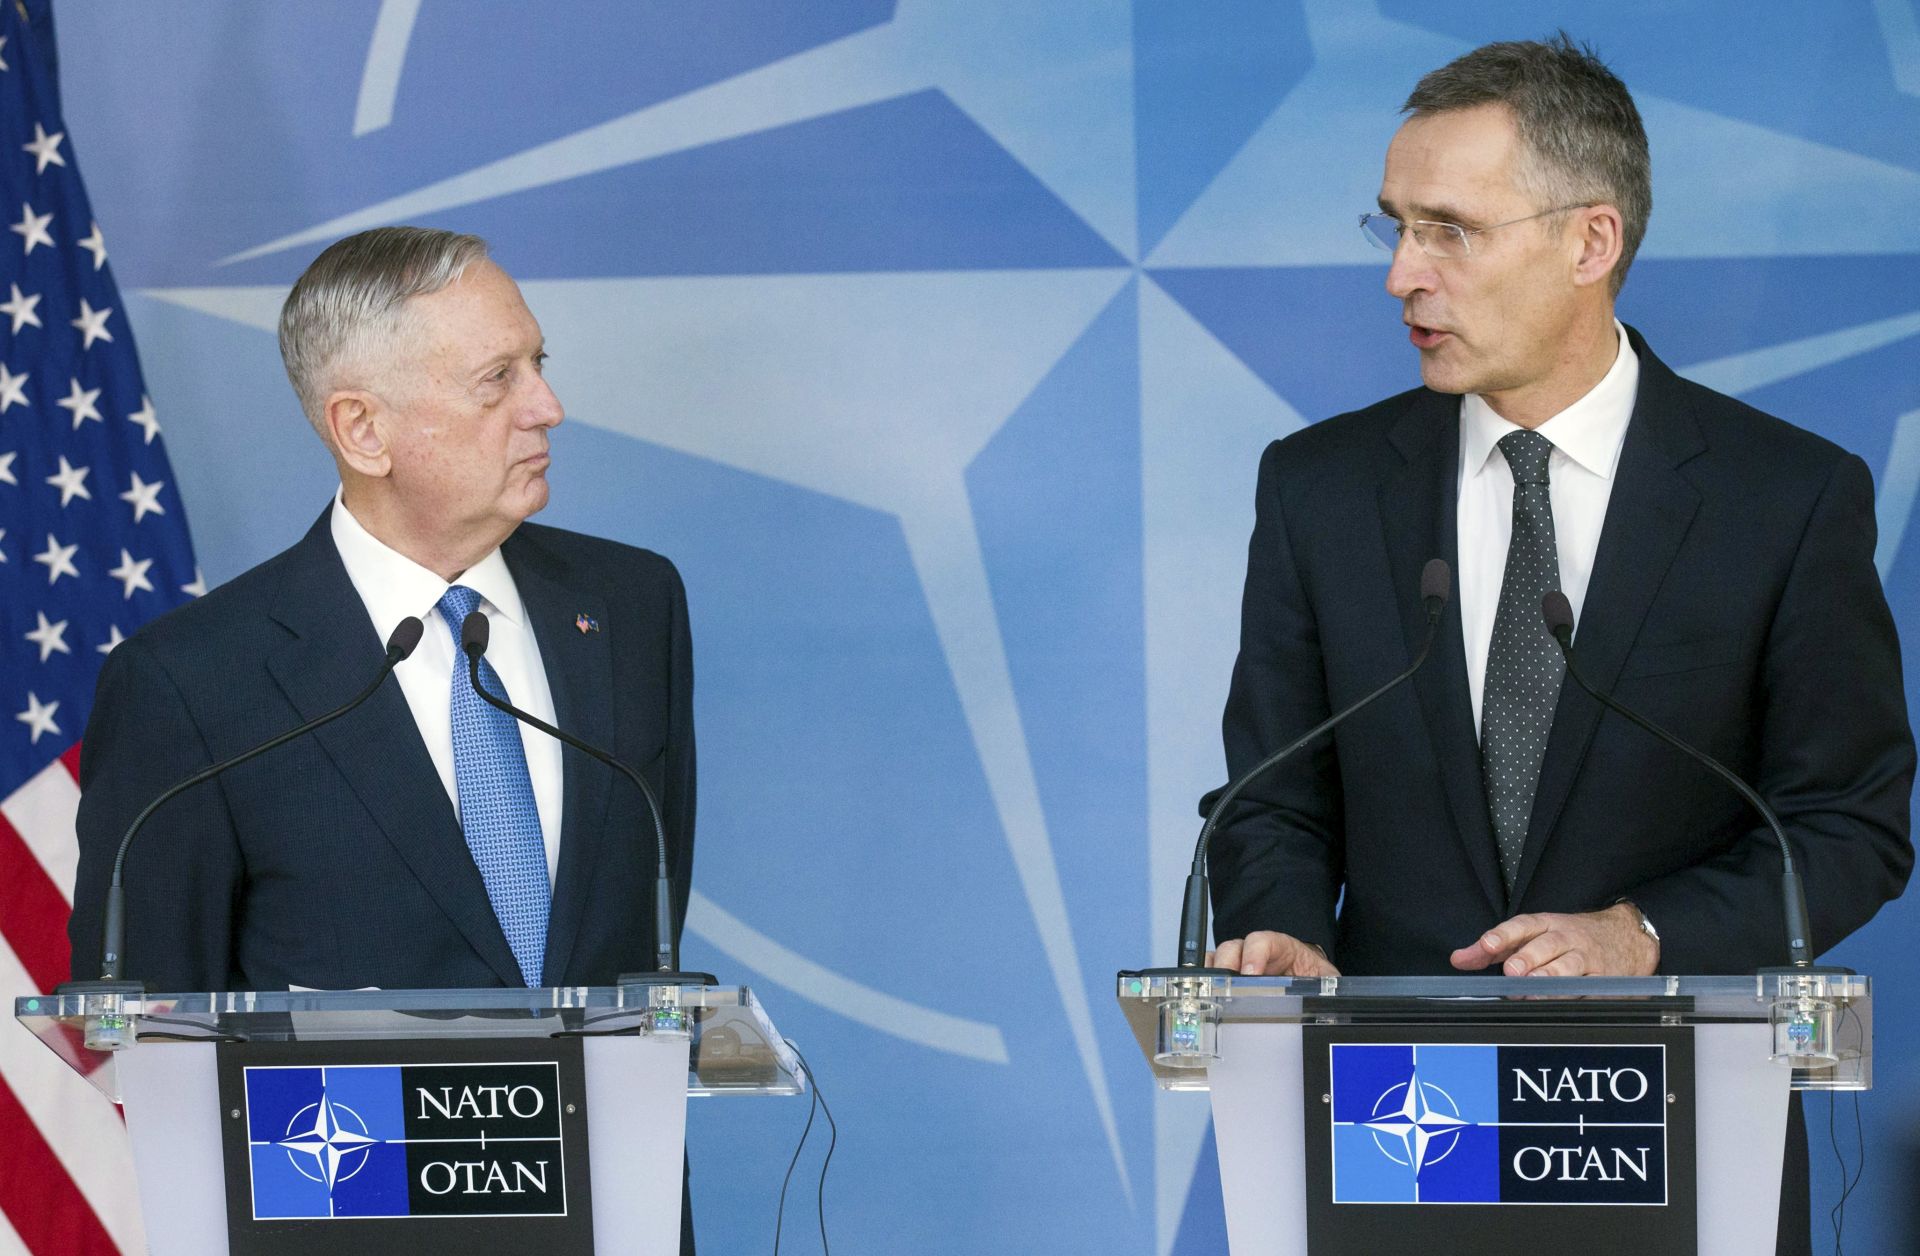 epa05794634 US Defence Secretary James Mattis (L) and NATO Secretary General Jens Stoltenberg (R) give a press conference during the NATO Defense Ministers Council at the alliance's headquarters in Brussels, Belgium, 15 February 2017. NATO defense ministers gathered a two-days meeting.  EPA/STEPHANIE LECOCQ